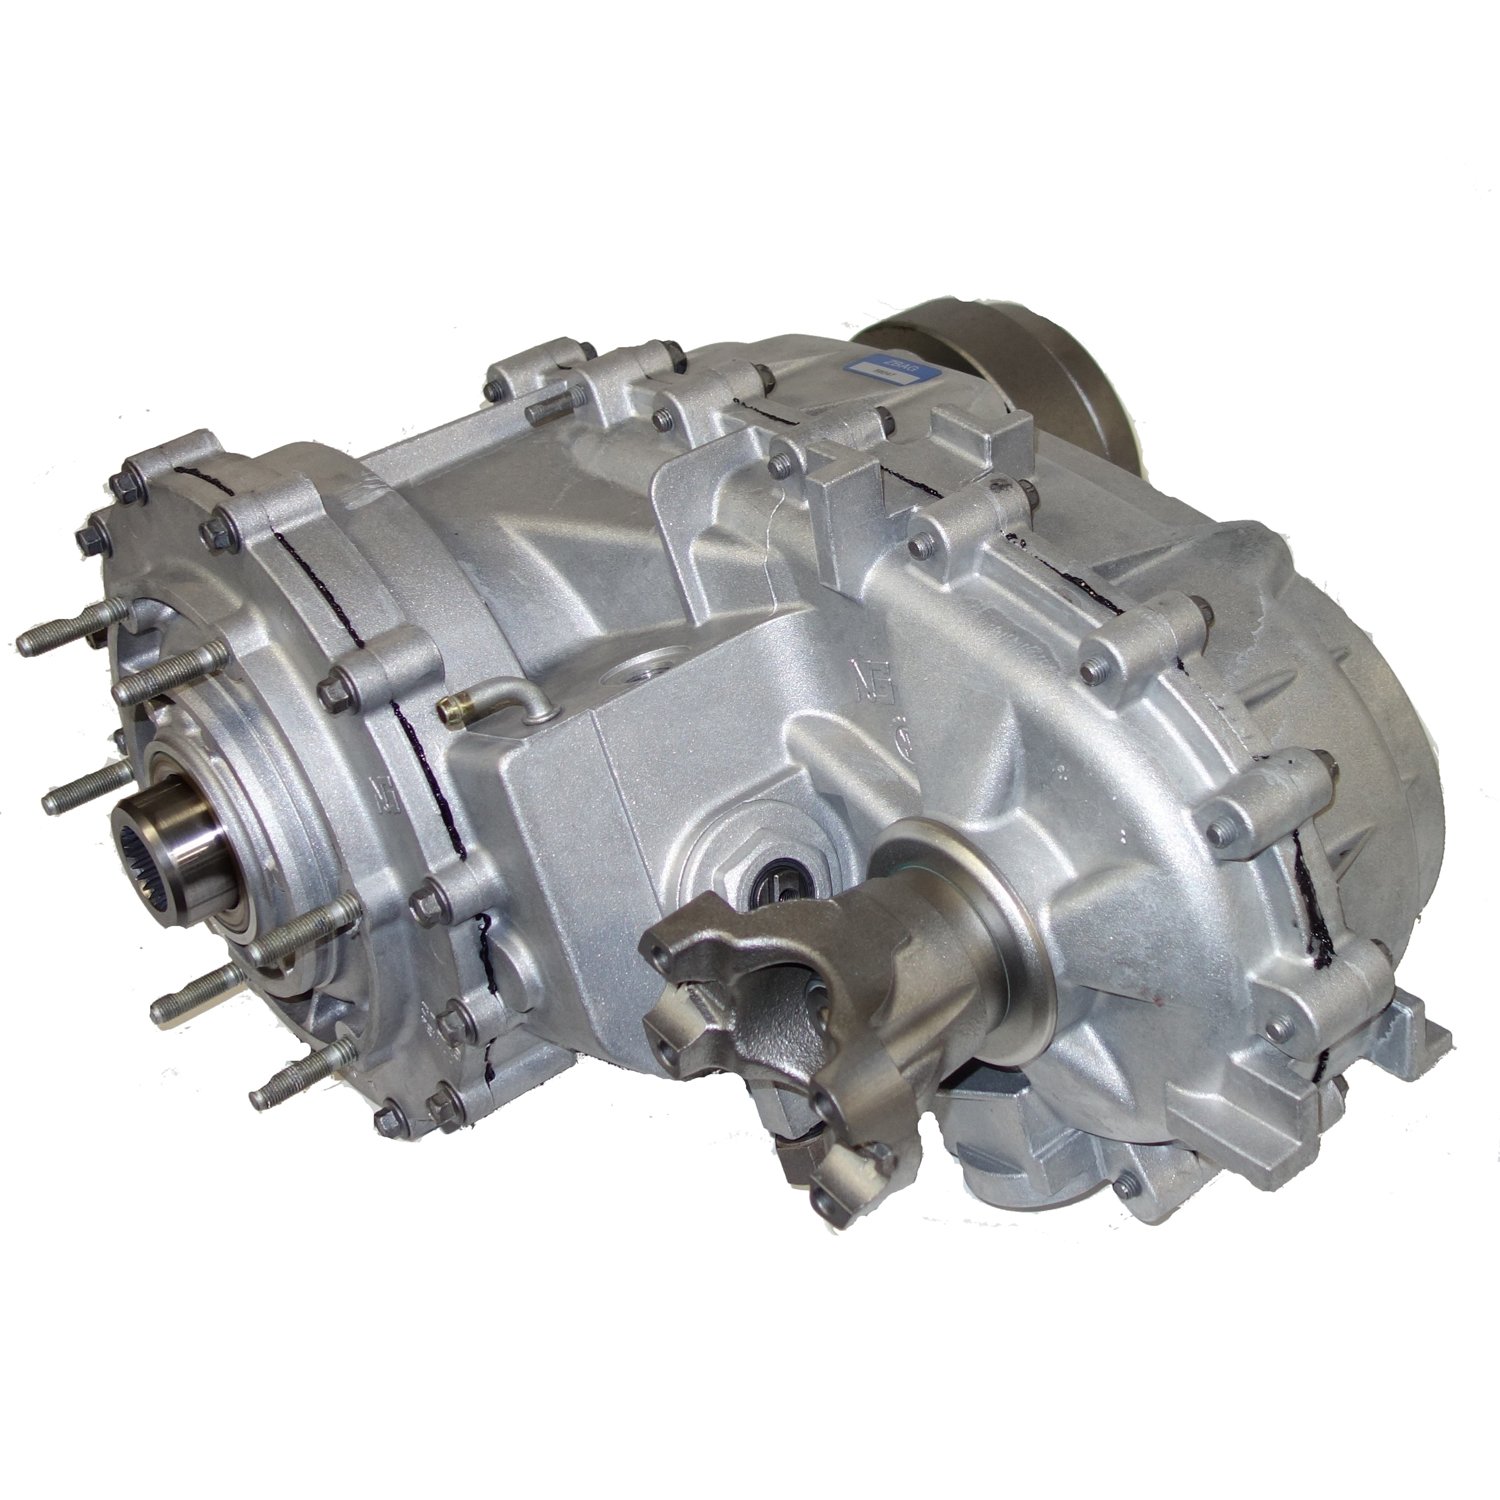 Remanufactured NP241 Transfer Case for Jeep 07-14 Wrangler